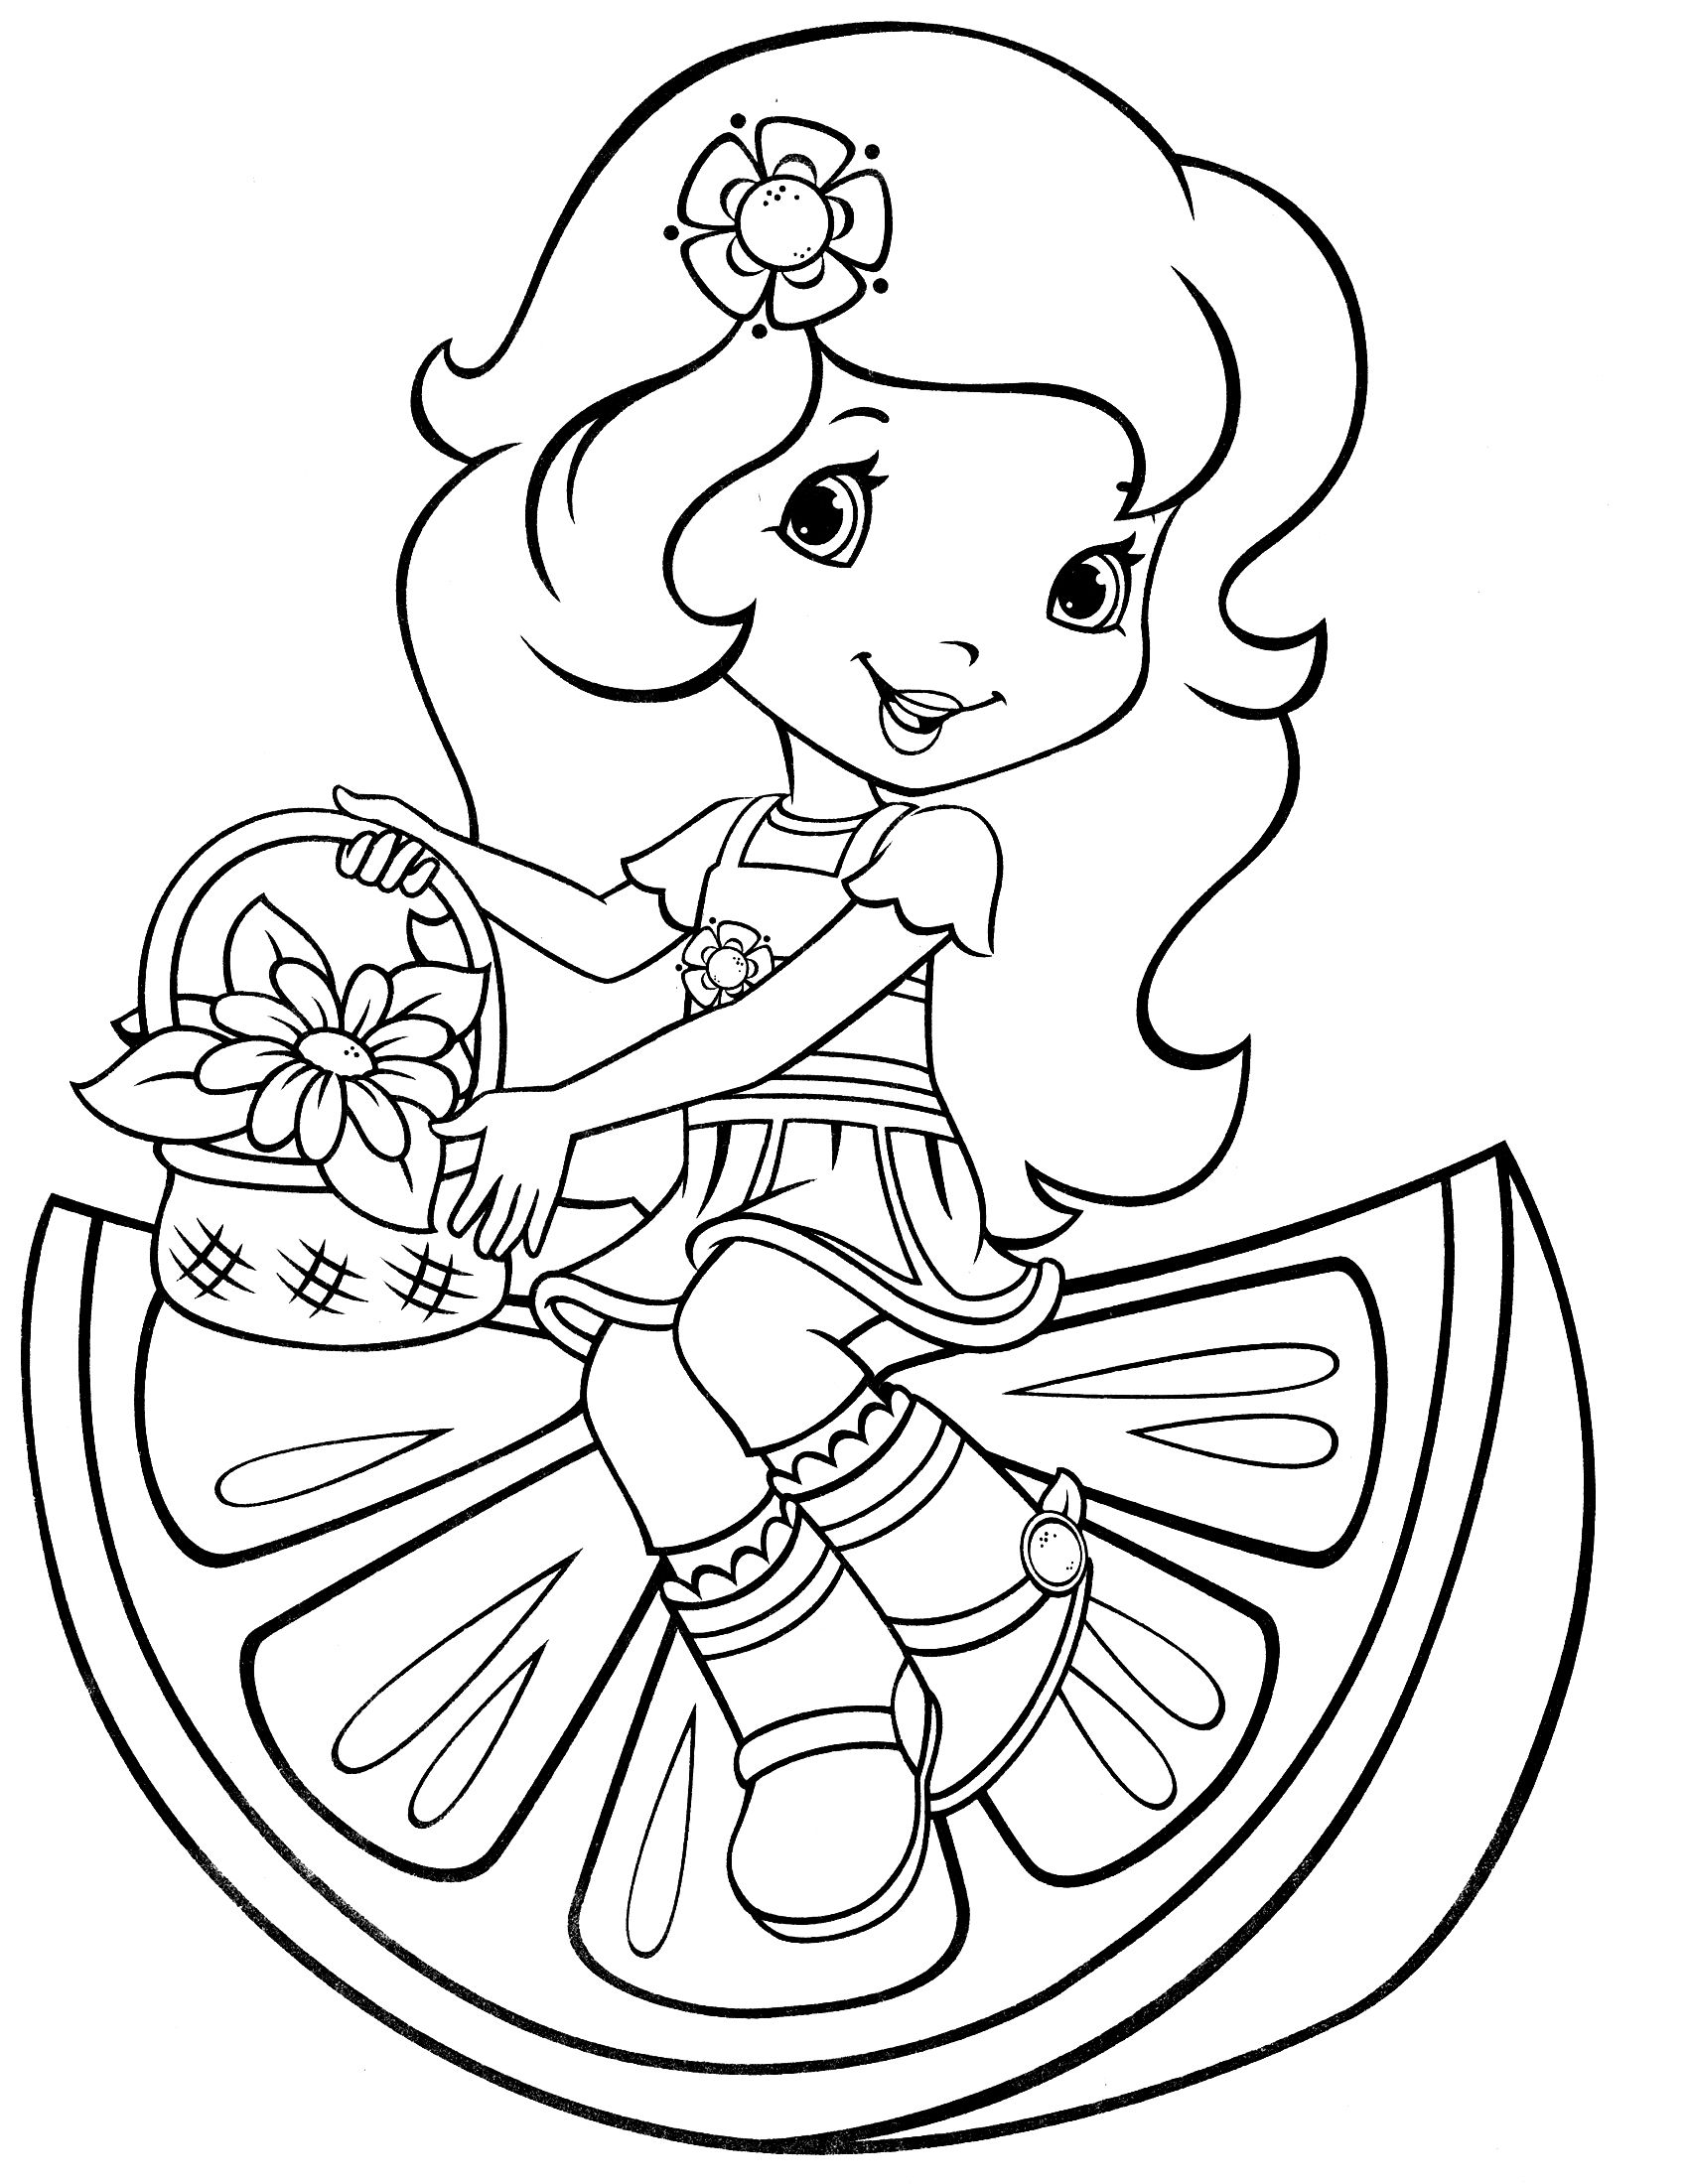 Printable Strawberry Shortcake Coloring Pages Pdf - Coloring Pages Strawberry Shortcake